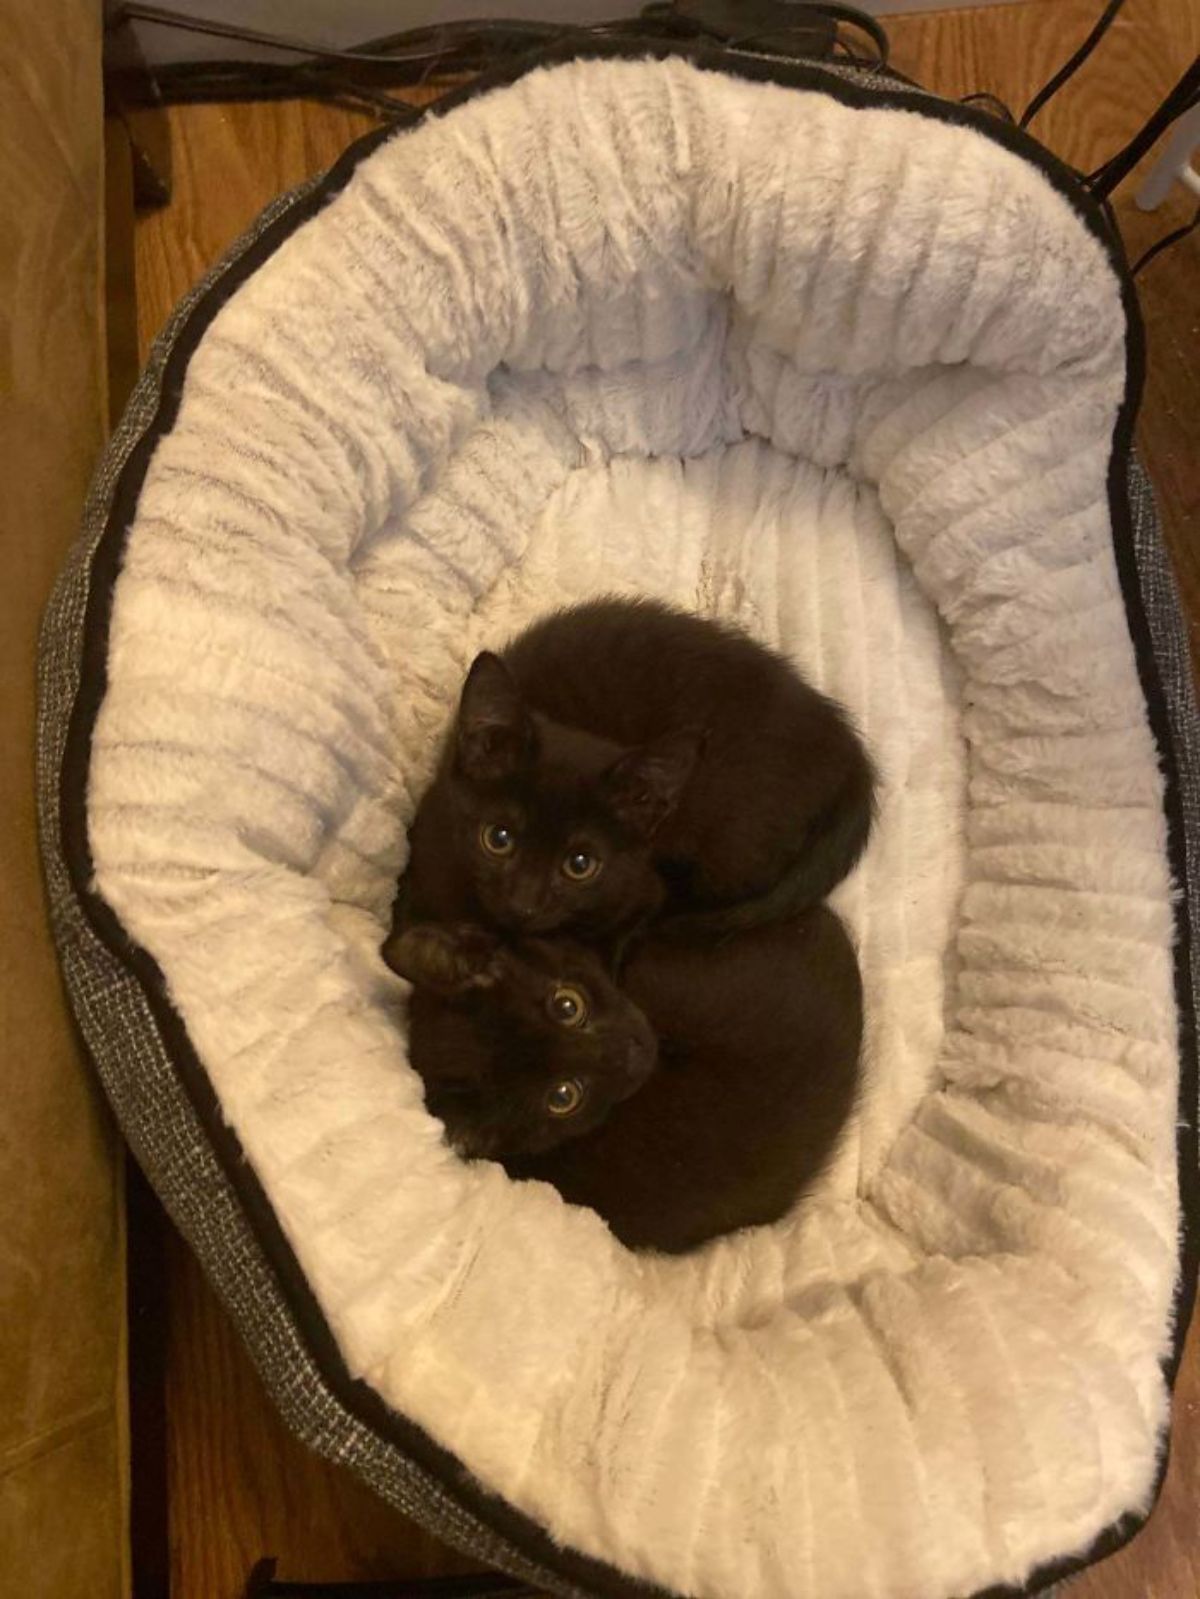 2 black kittens laying in a grey cat bed